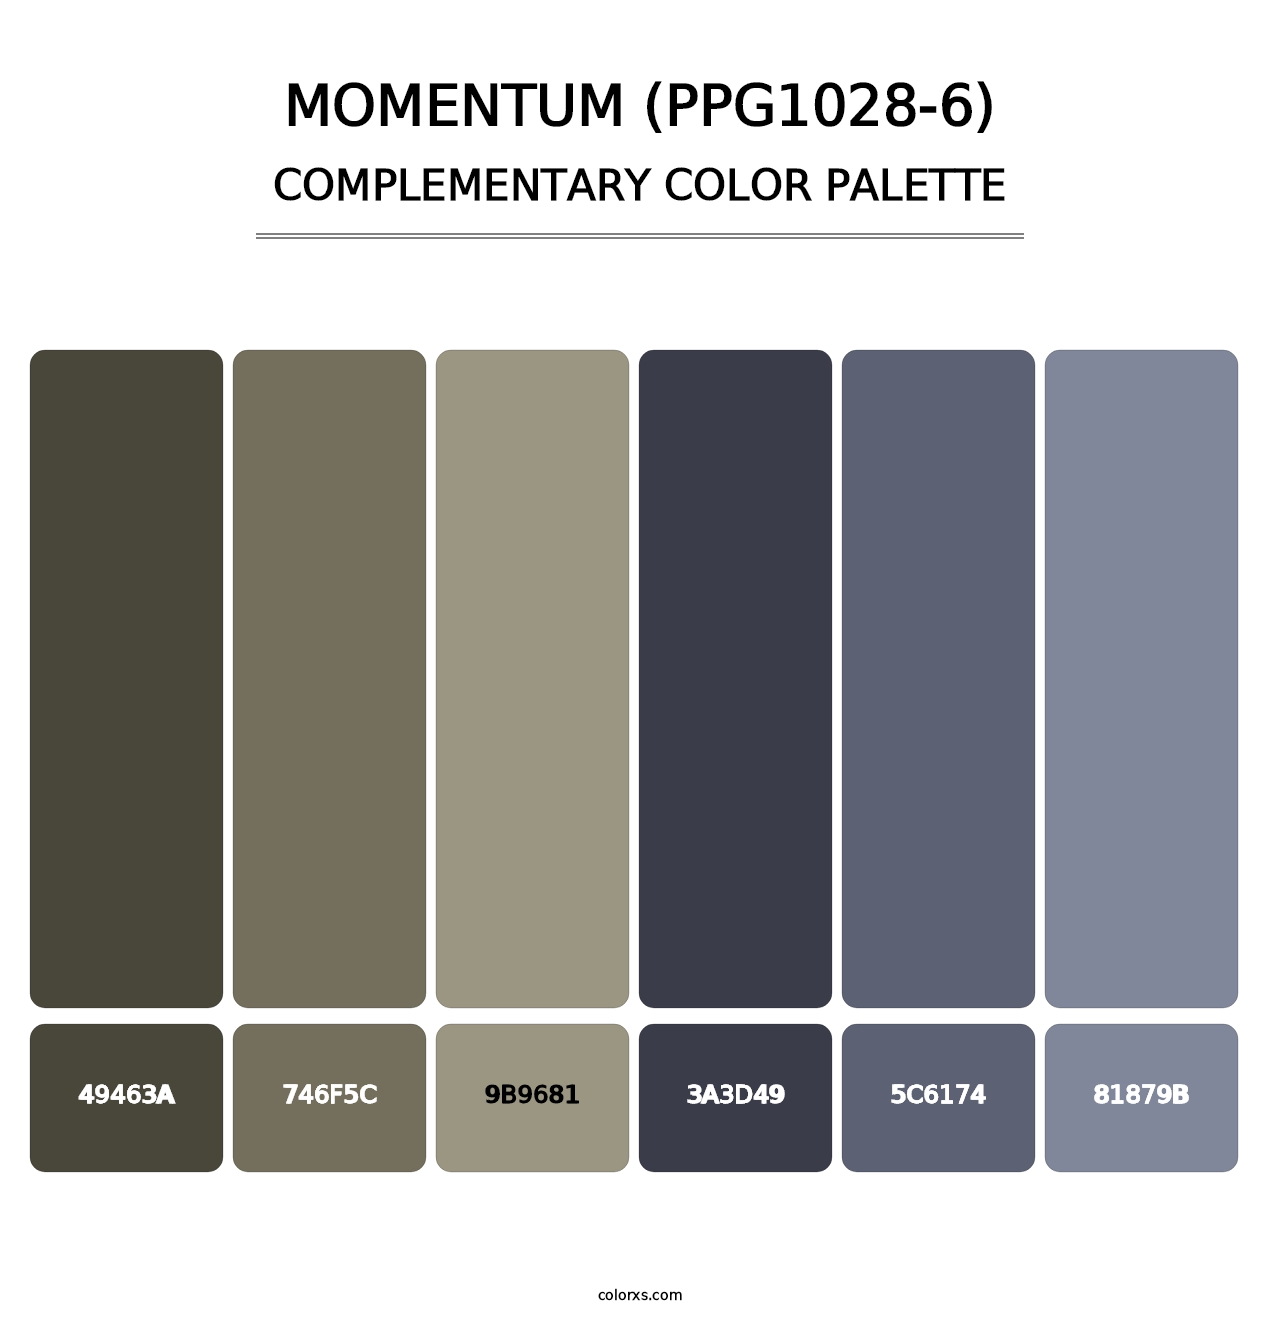 Momentum (PPG1028-6) - Complementary Color Palette